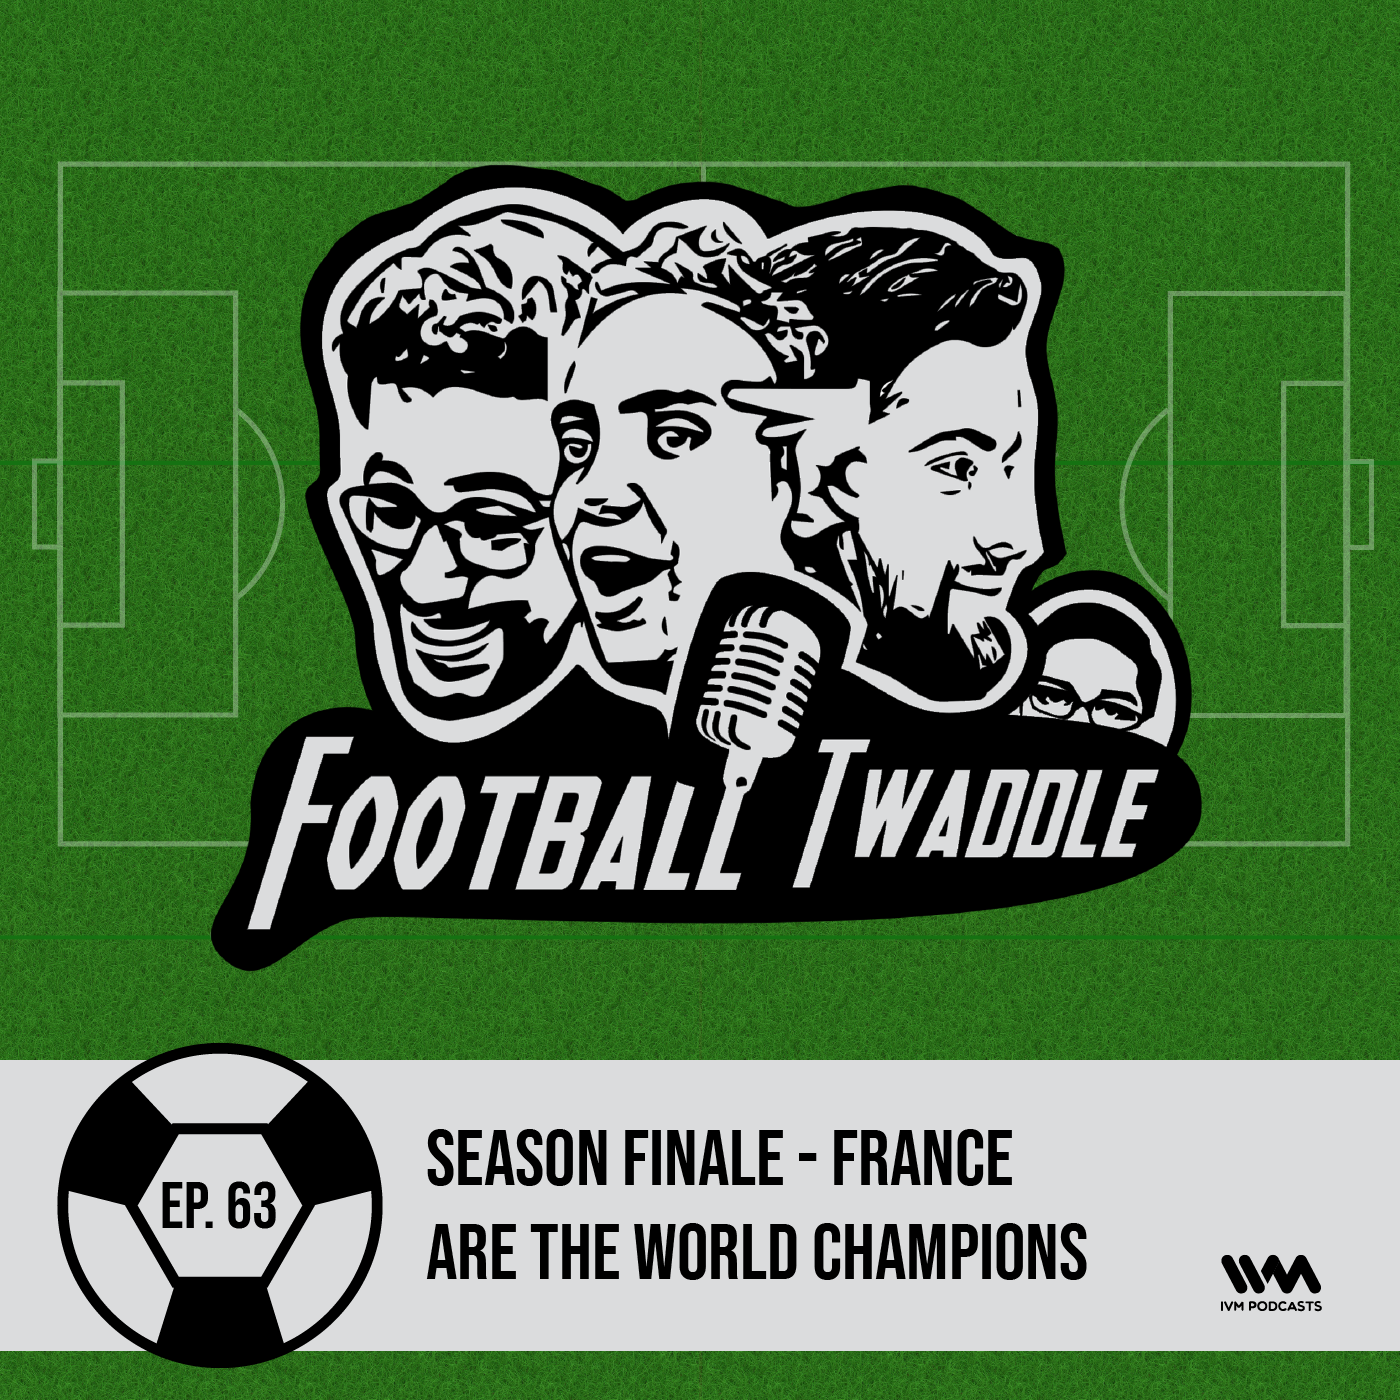 Season Finale - France are the World Champions